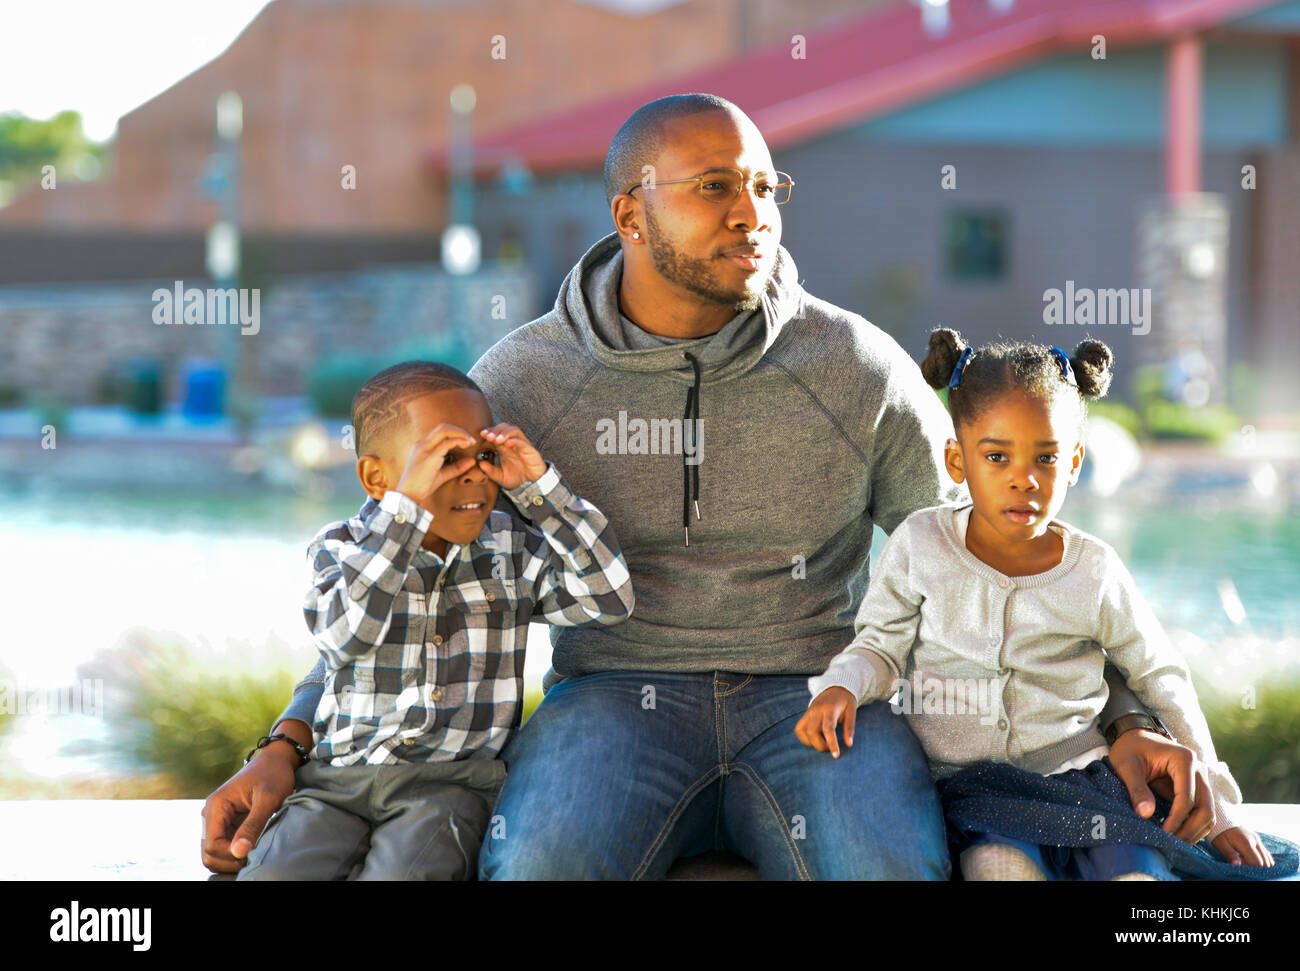 African American Man with son and daughter in a park. Stock Photo